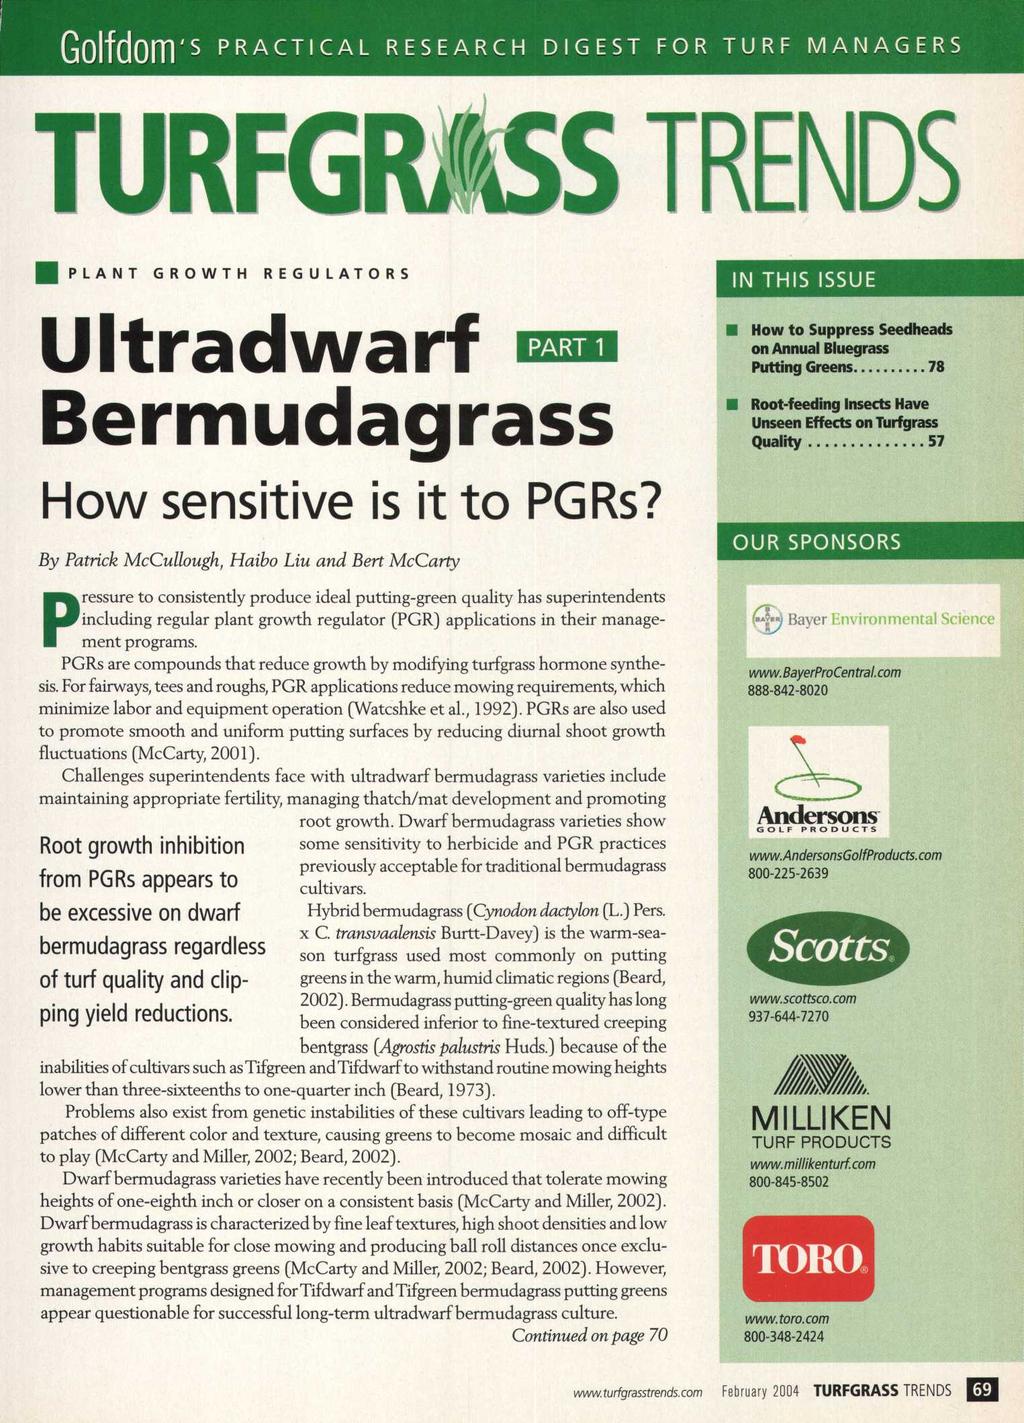 Golfdom S PRACTICAL RESEARCH DIGEST FOR TURF MANAGERS Tl IDC/ZD I UKnjK SS TRENDS PLANT GROWTH REGULATORS IN THIS ISSUE Ultradwarf PART 1 Bermudagrass How sensitive is it to PGRs?